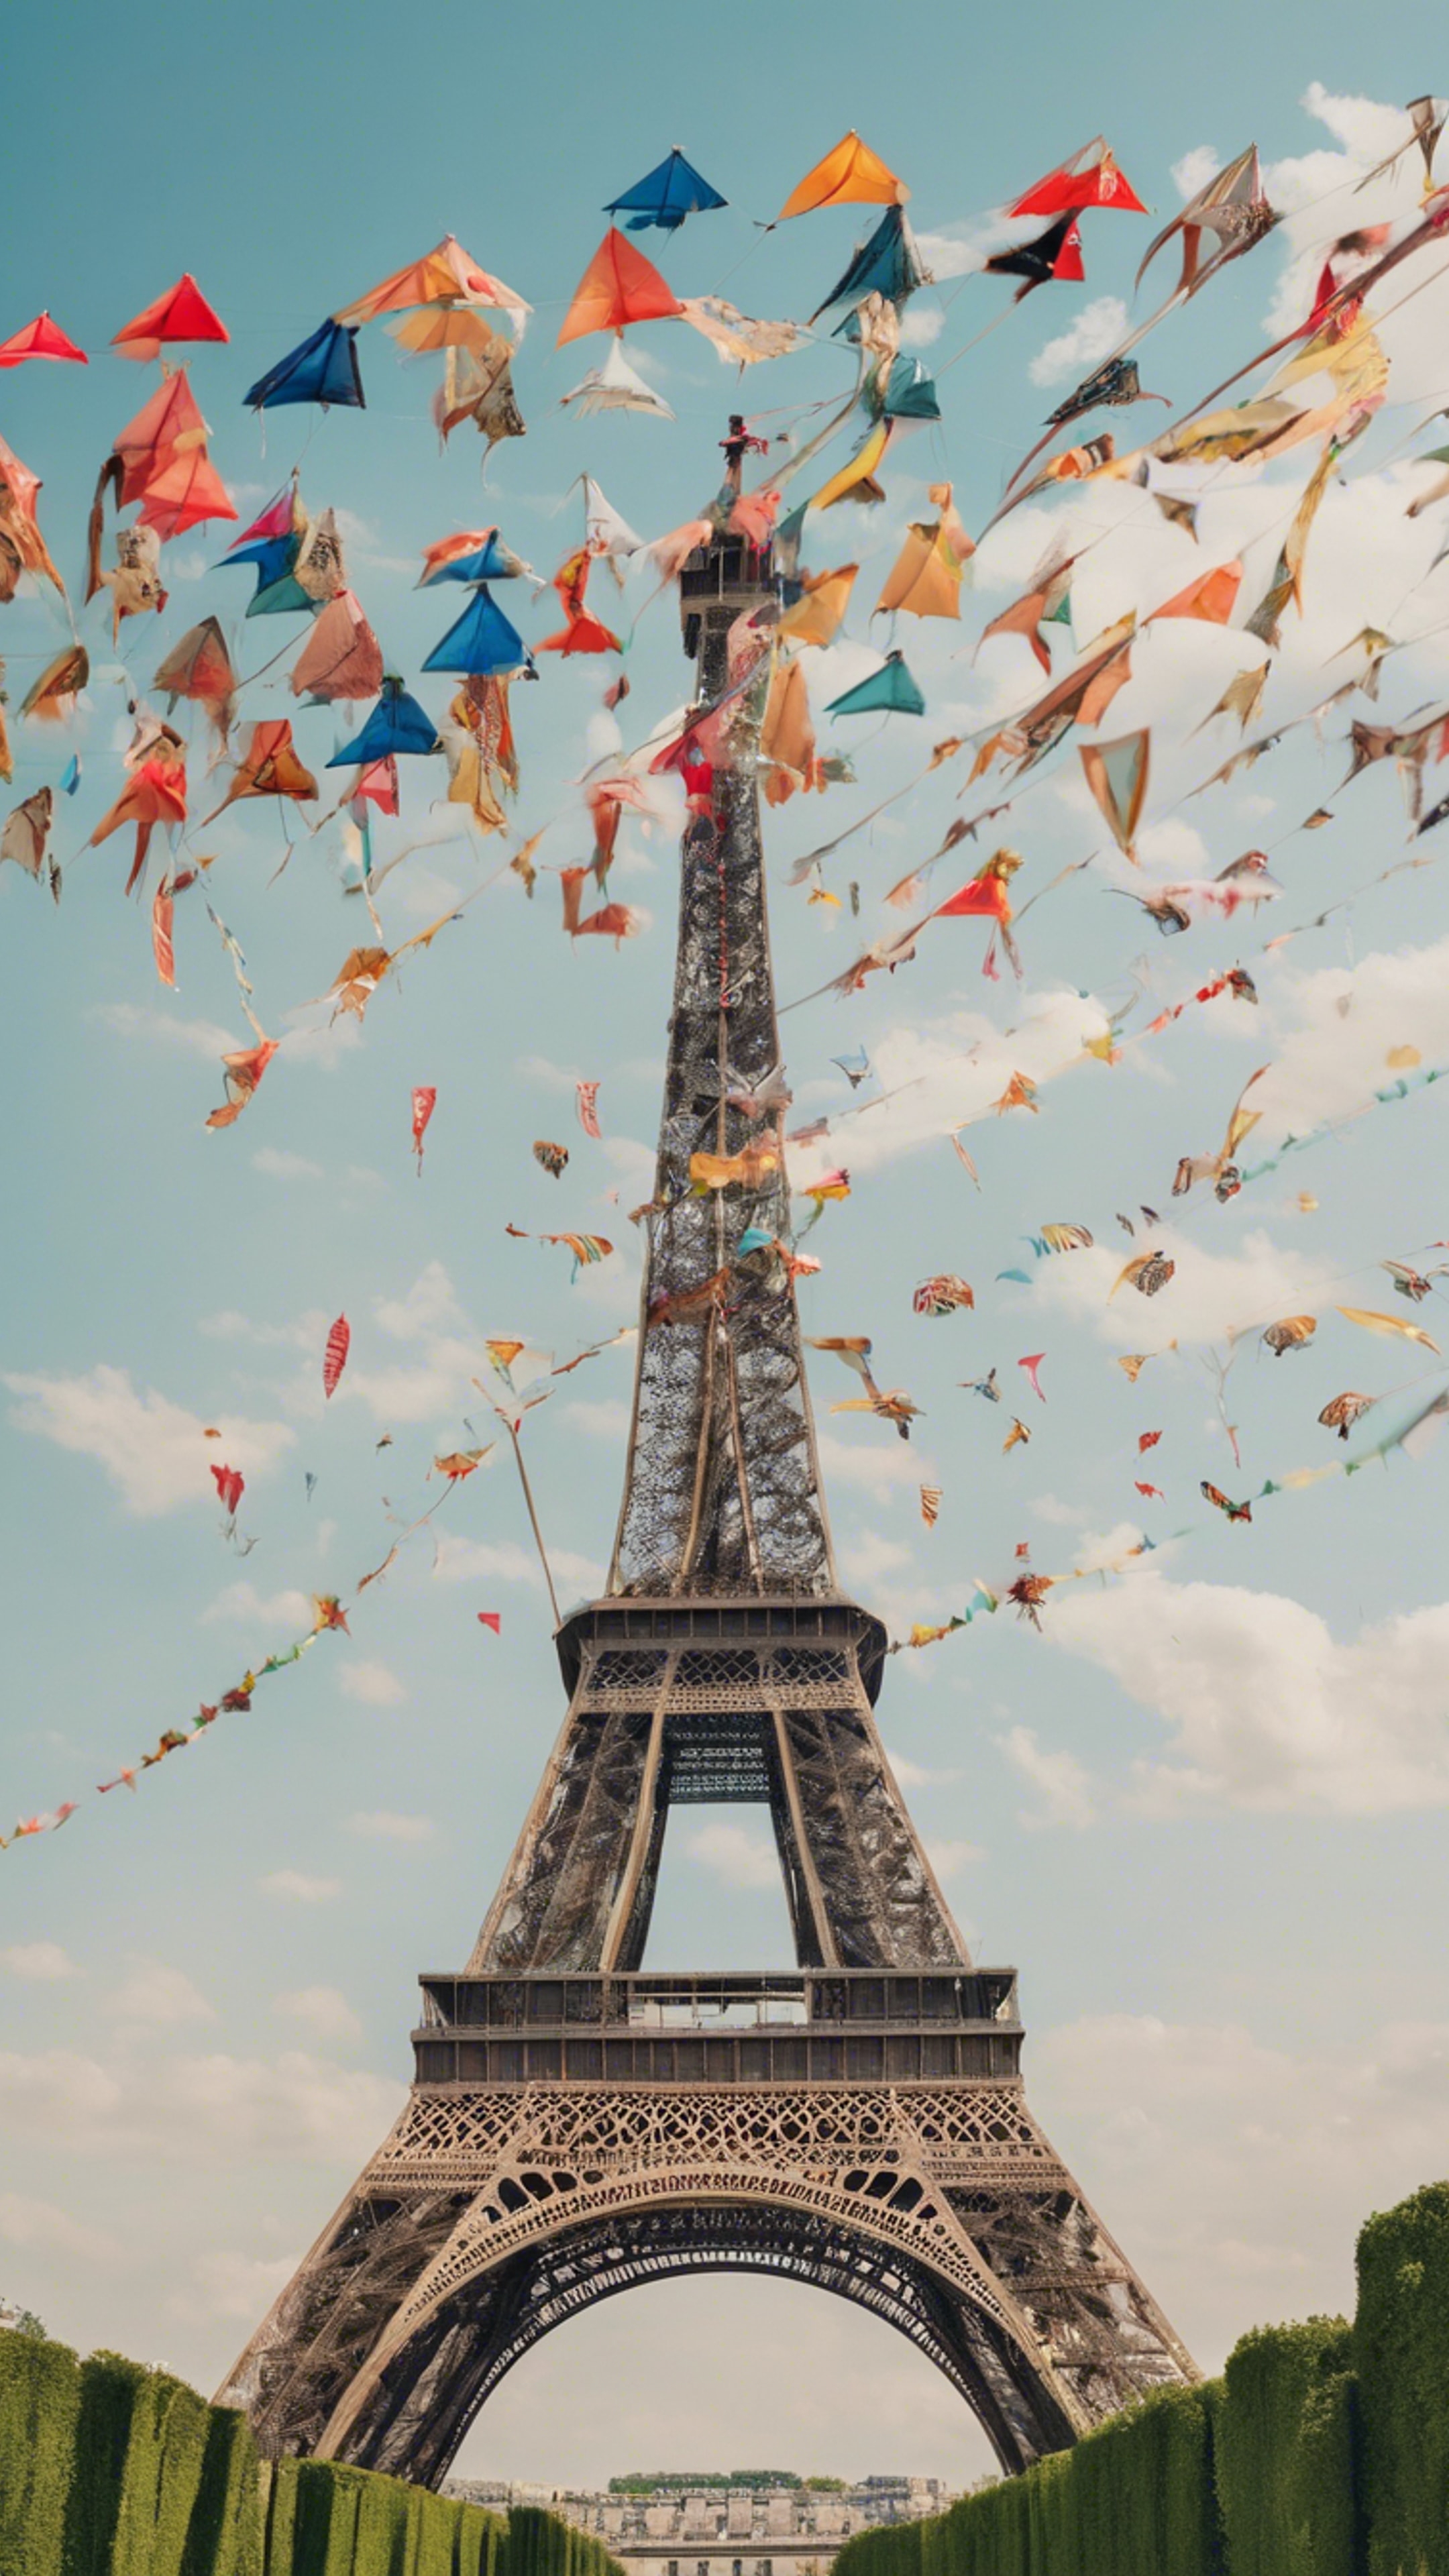 Numerous colorful kites flying around the Eiffel Tower on a breezy summer day. Валлпапер[13c5a5af918a46f7995e]